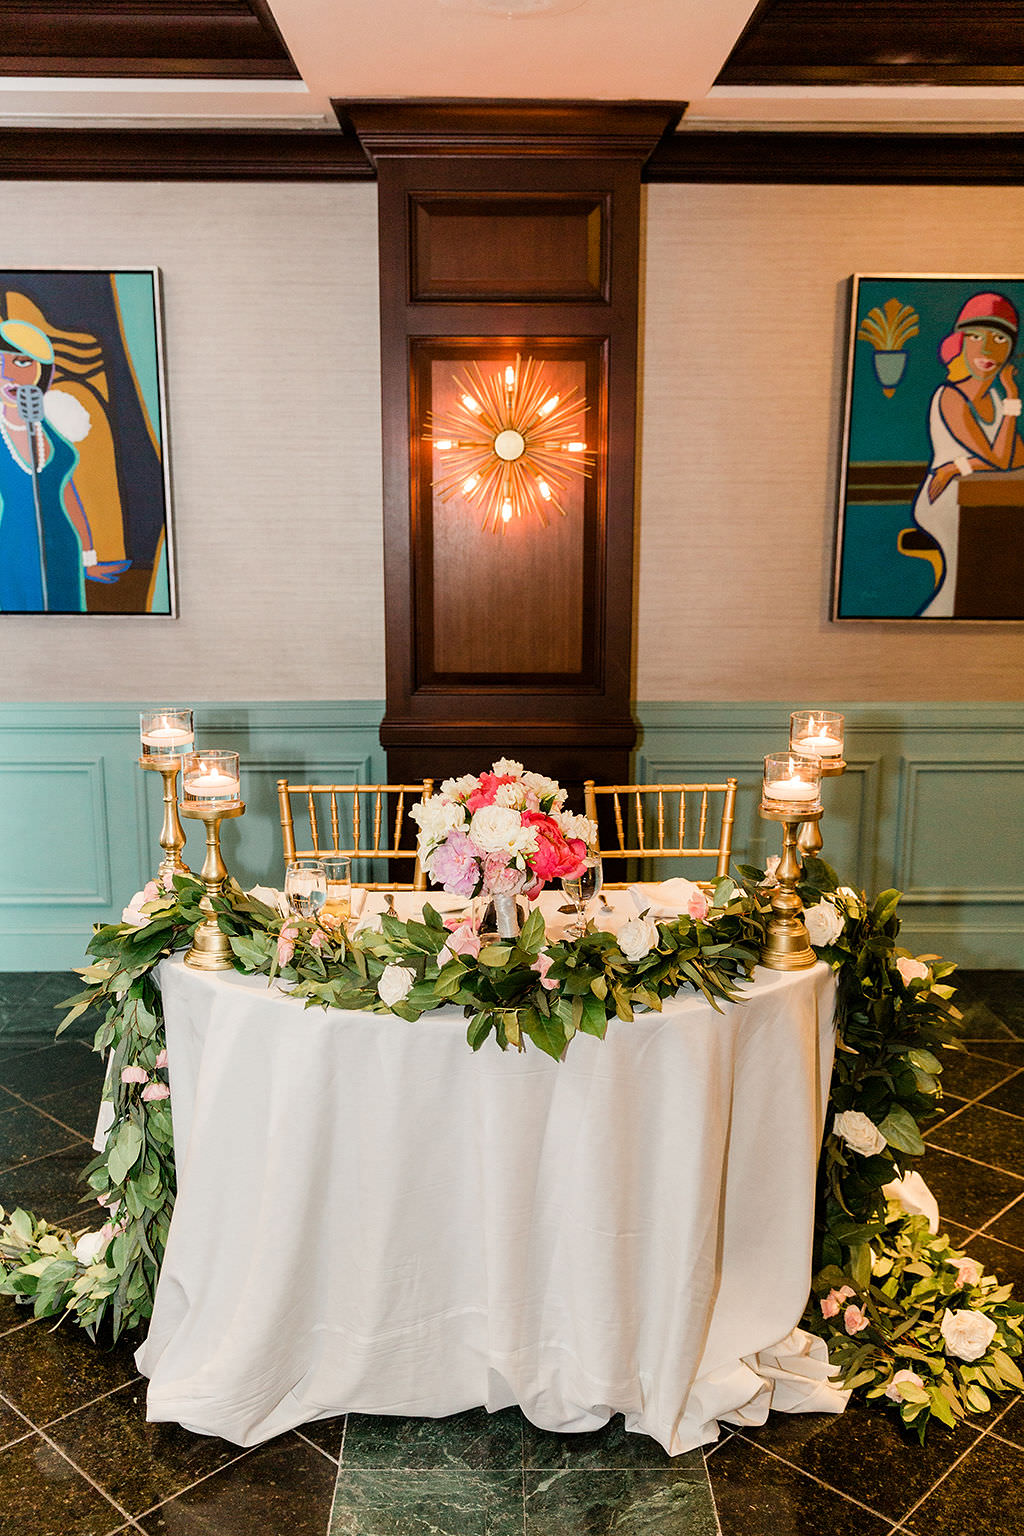 Elegant Tampa Bay Wedding Reception Decor, Sweetheart Table with White Linen, Greenery Garland and White Florals, Pink and Blush Pink Floral Arrangement and Gold Candlesticks, Gold Chiavari Chairs | Fred's Cellar at The Vinoy